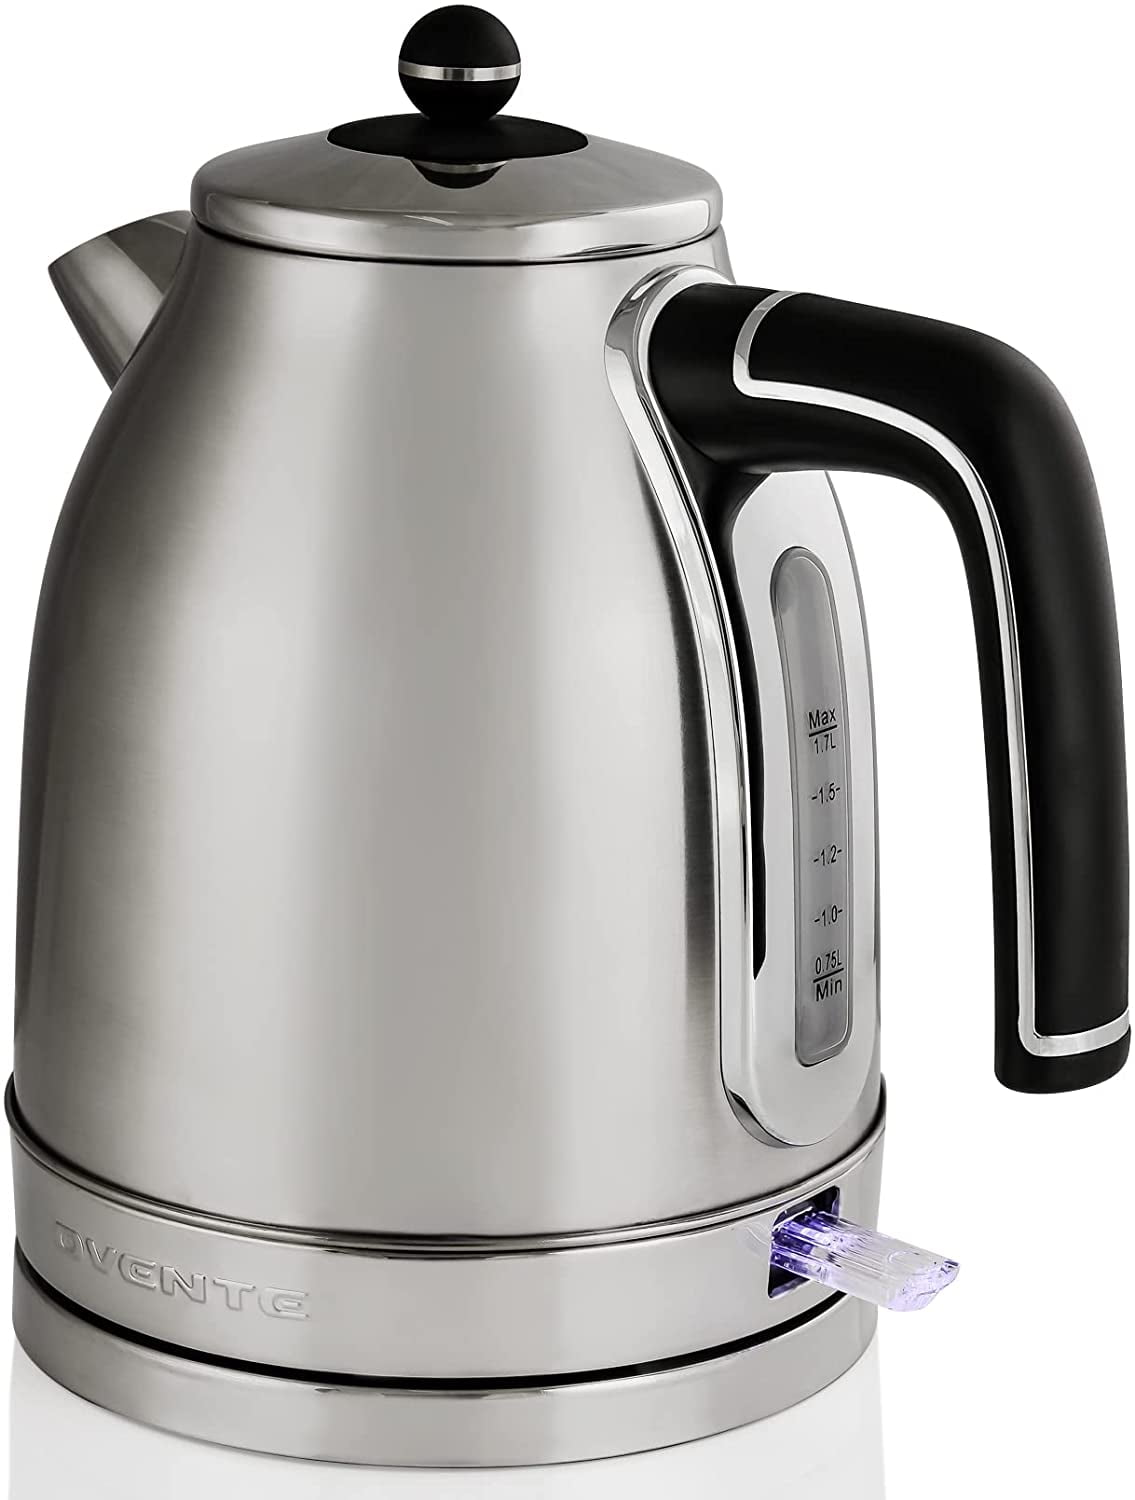 Rae Dunn Electric Water Kettle - Stainless Steel Coffee Maker, 1.7 Liter  Tea Kettle, Electric Hot Water Kettle with Automatic Shut Off Boil-Dry